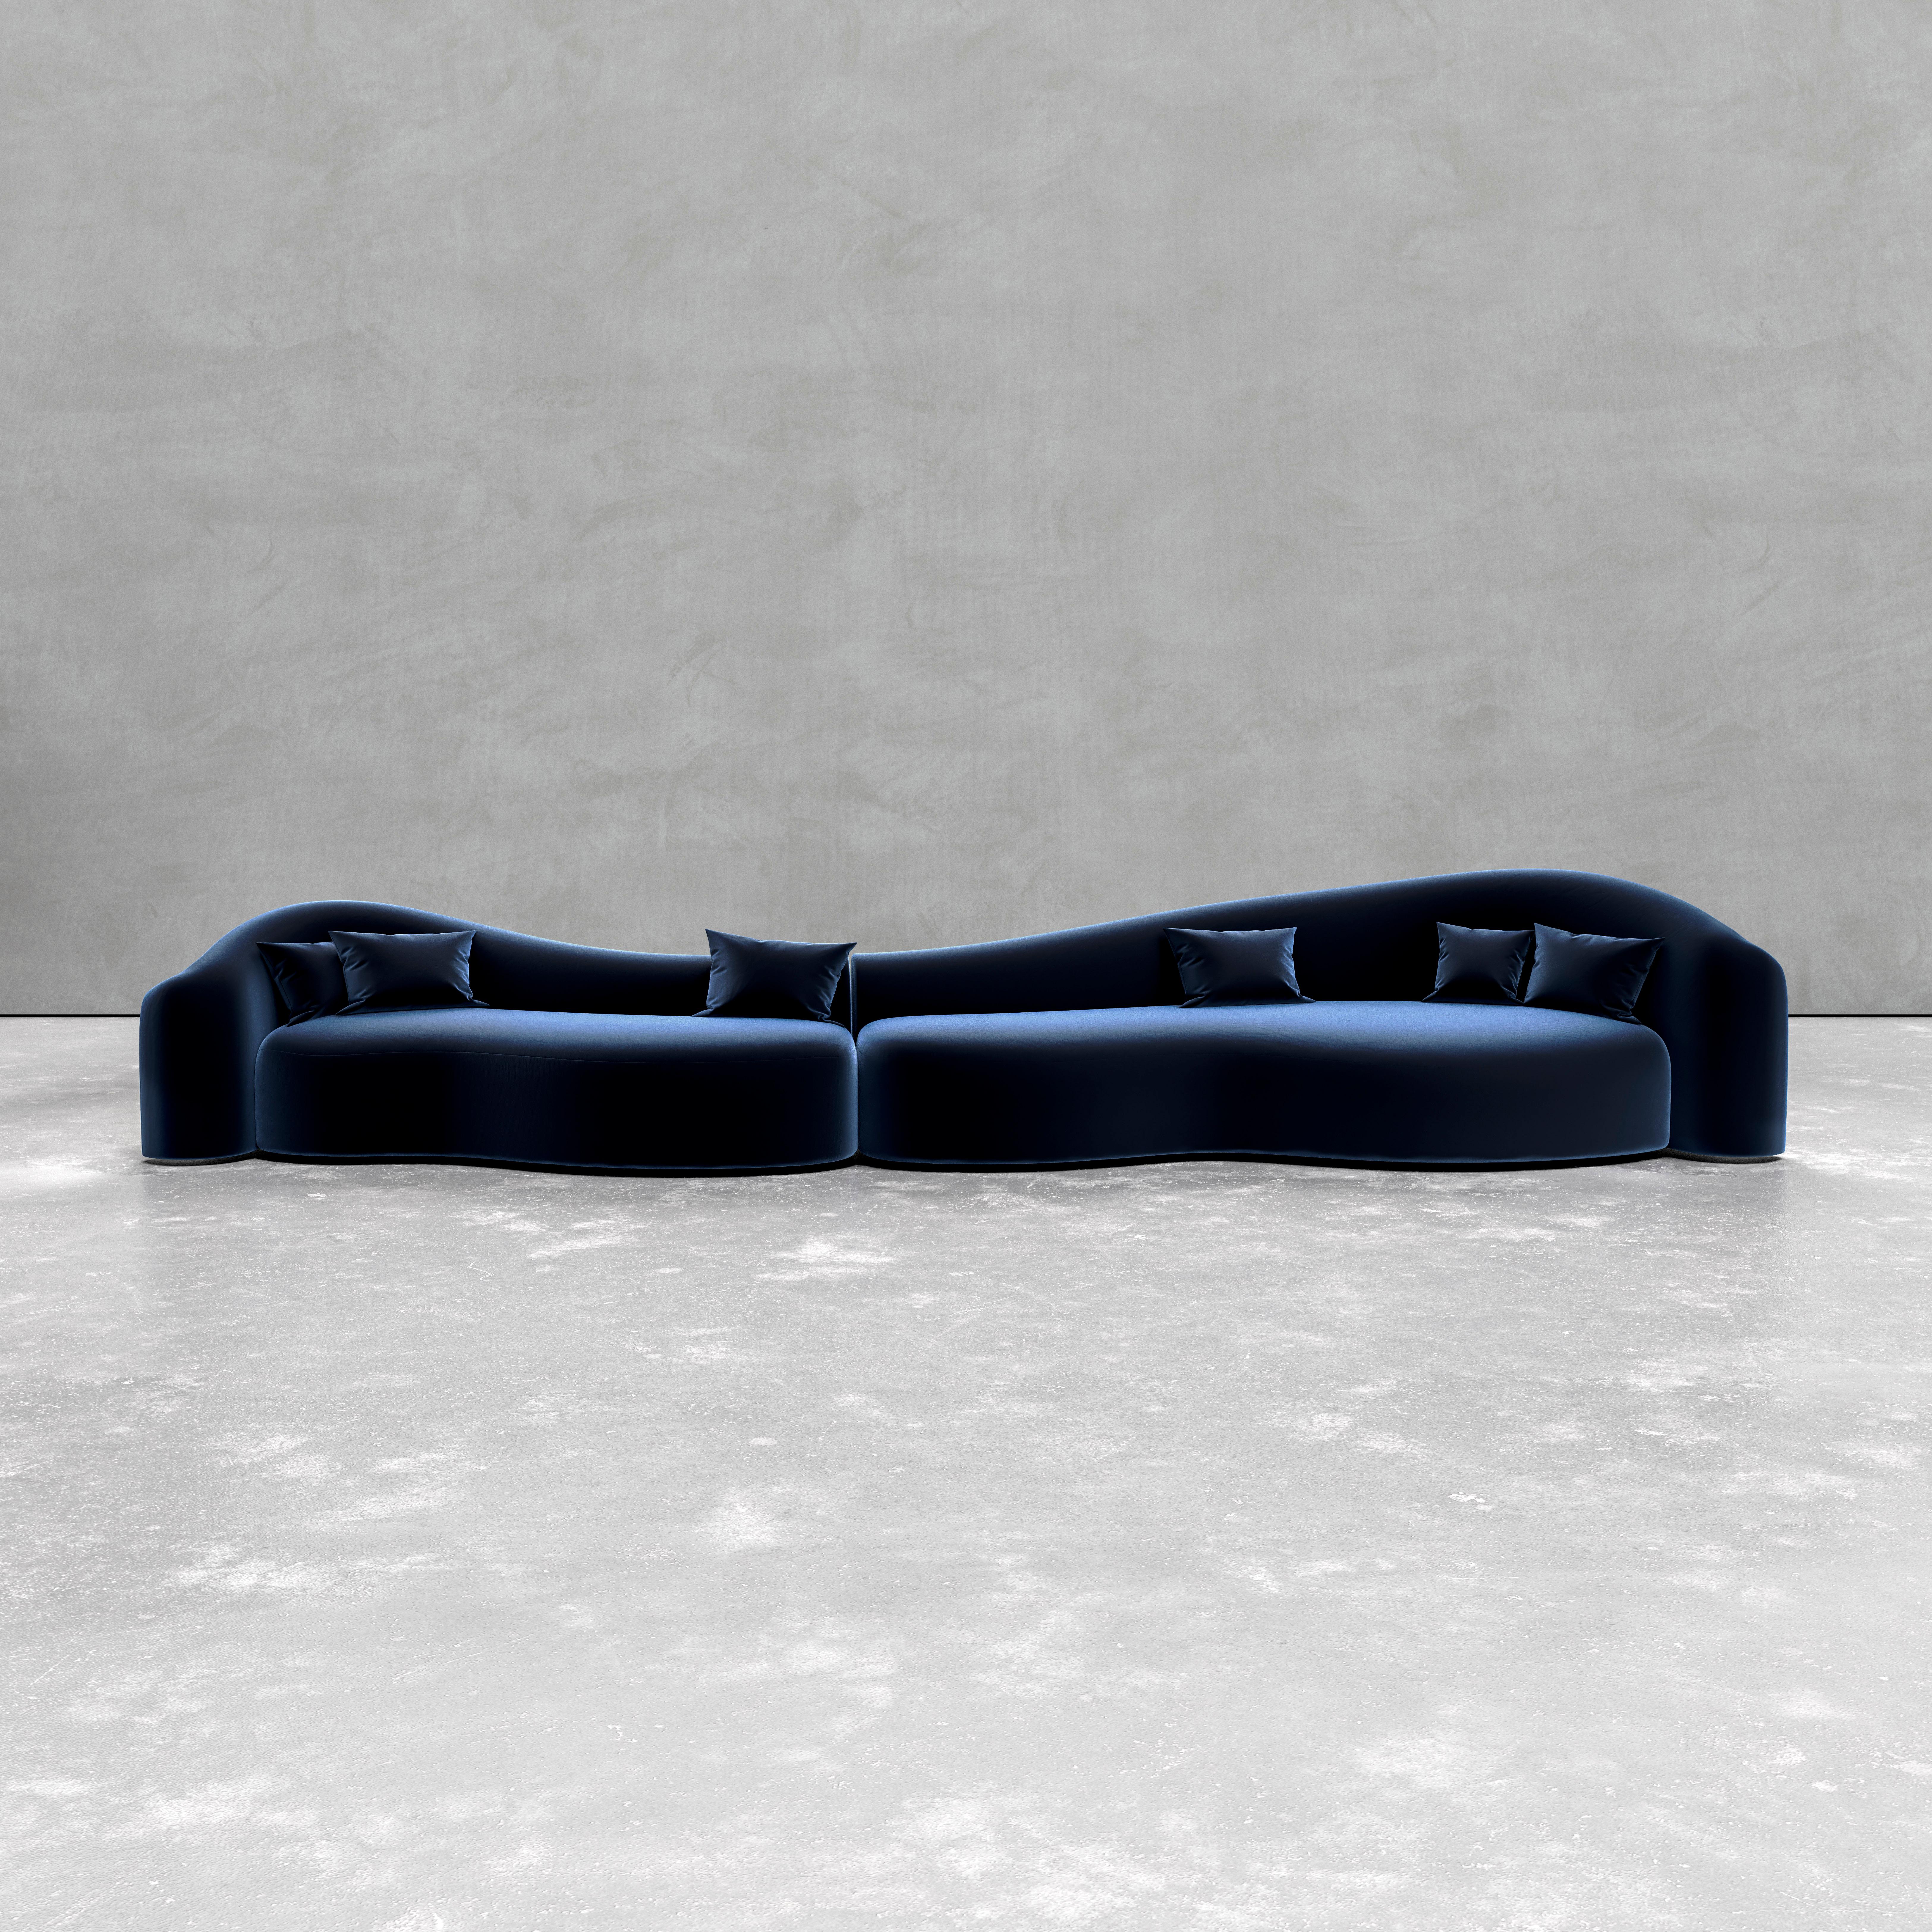 Baïne Navy Sofa by Jérôme Bugara
Limited Edition Of 25 Pieces.
Dimensions: D 100 x W 550 x H 91,5 cm. SH: 45 cm.
Materials: Lelièvre navy velvet fabric.

Signed, serial number and certificate of Authenticity. 6 cushions are included. Also available